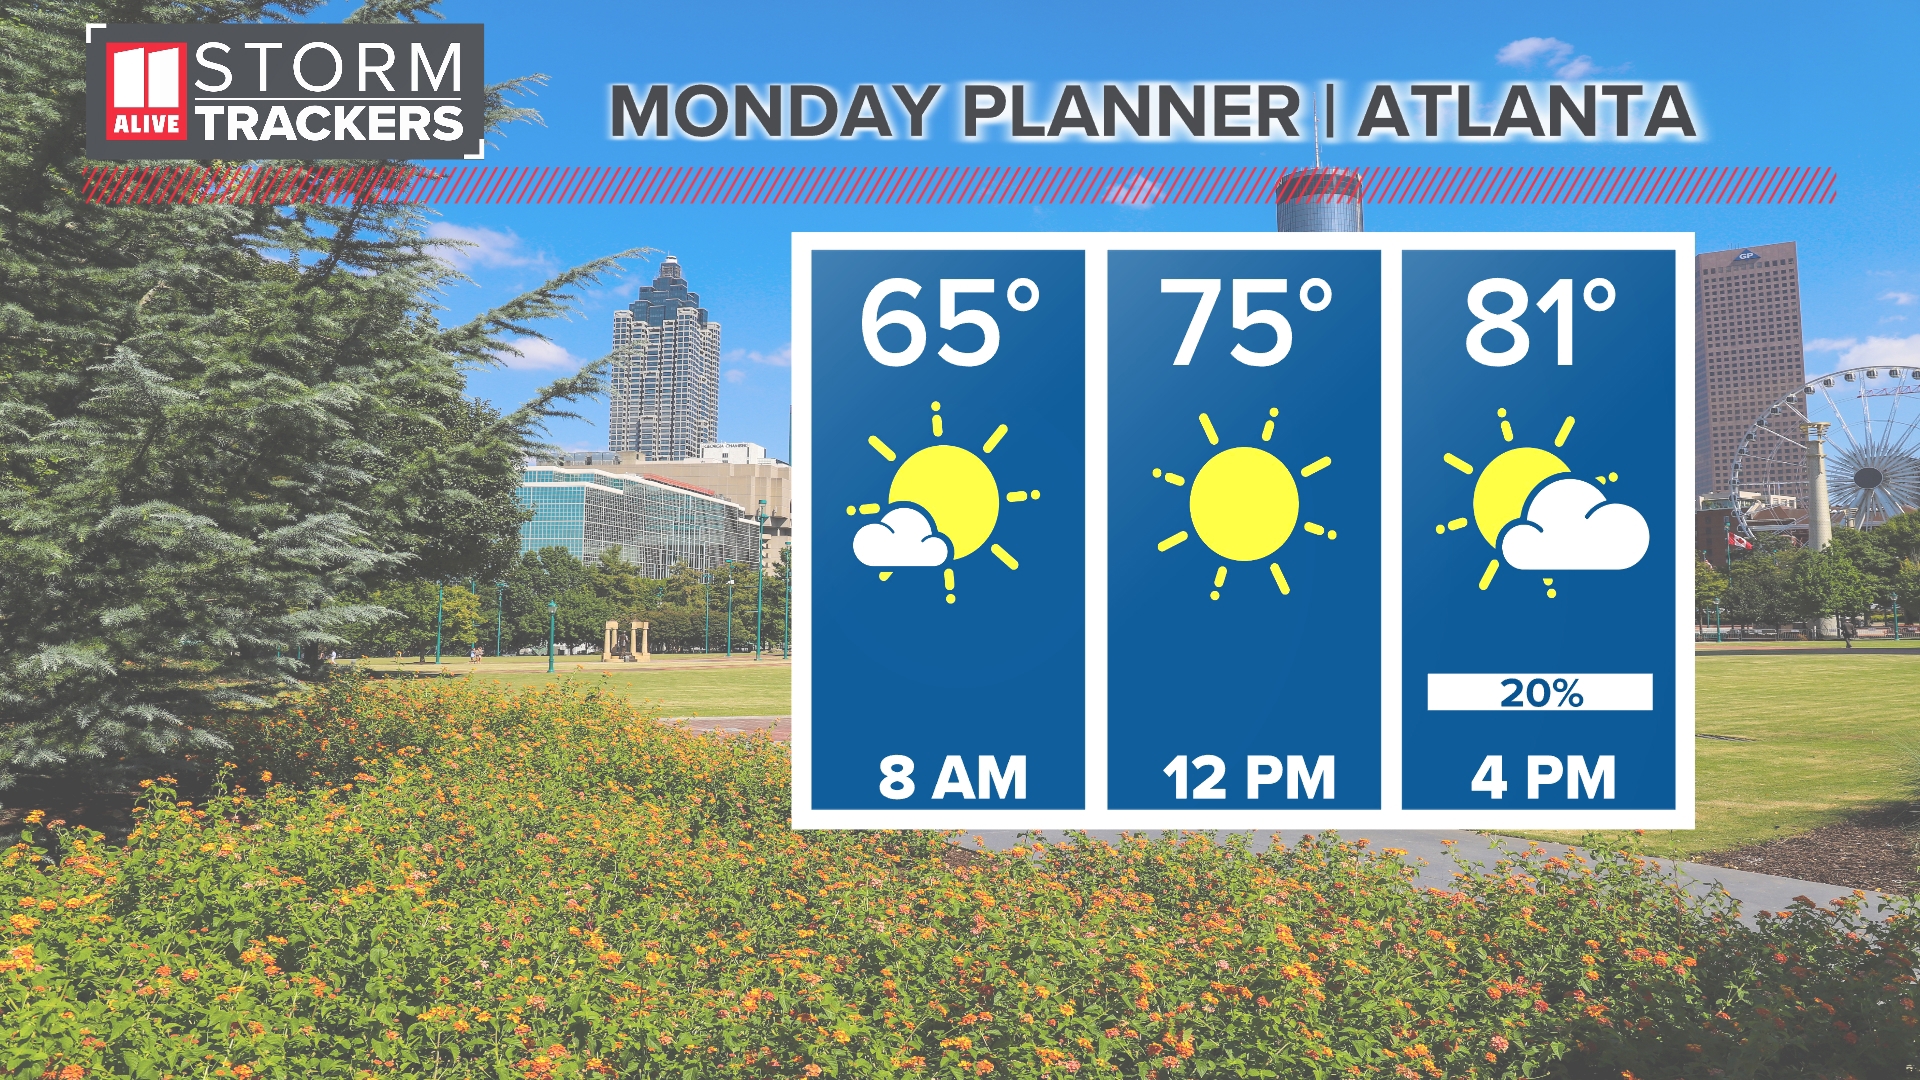 Expect a slight chance for rain on Monday with warmer conditions moving in.